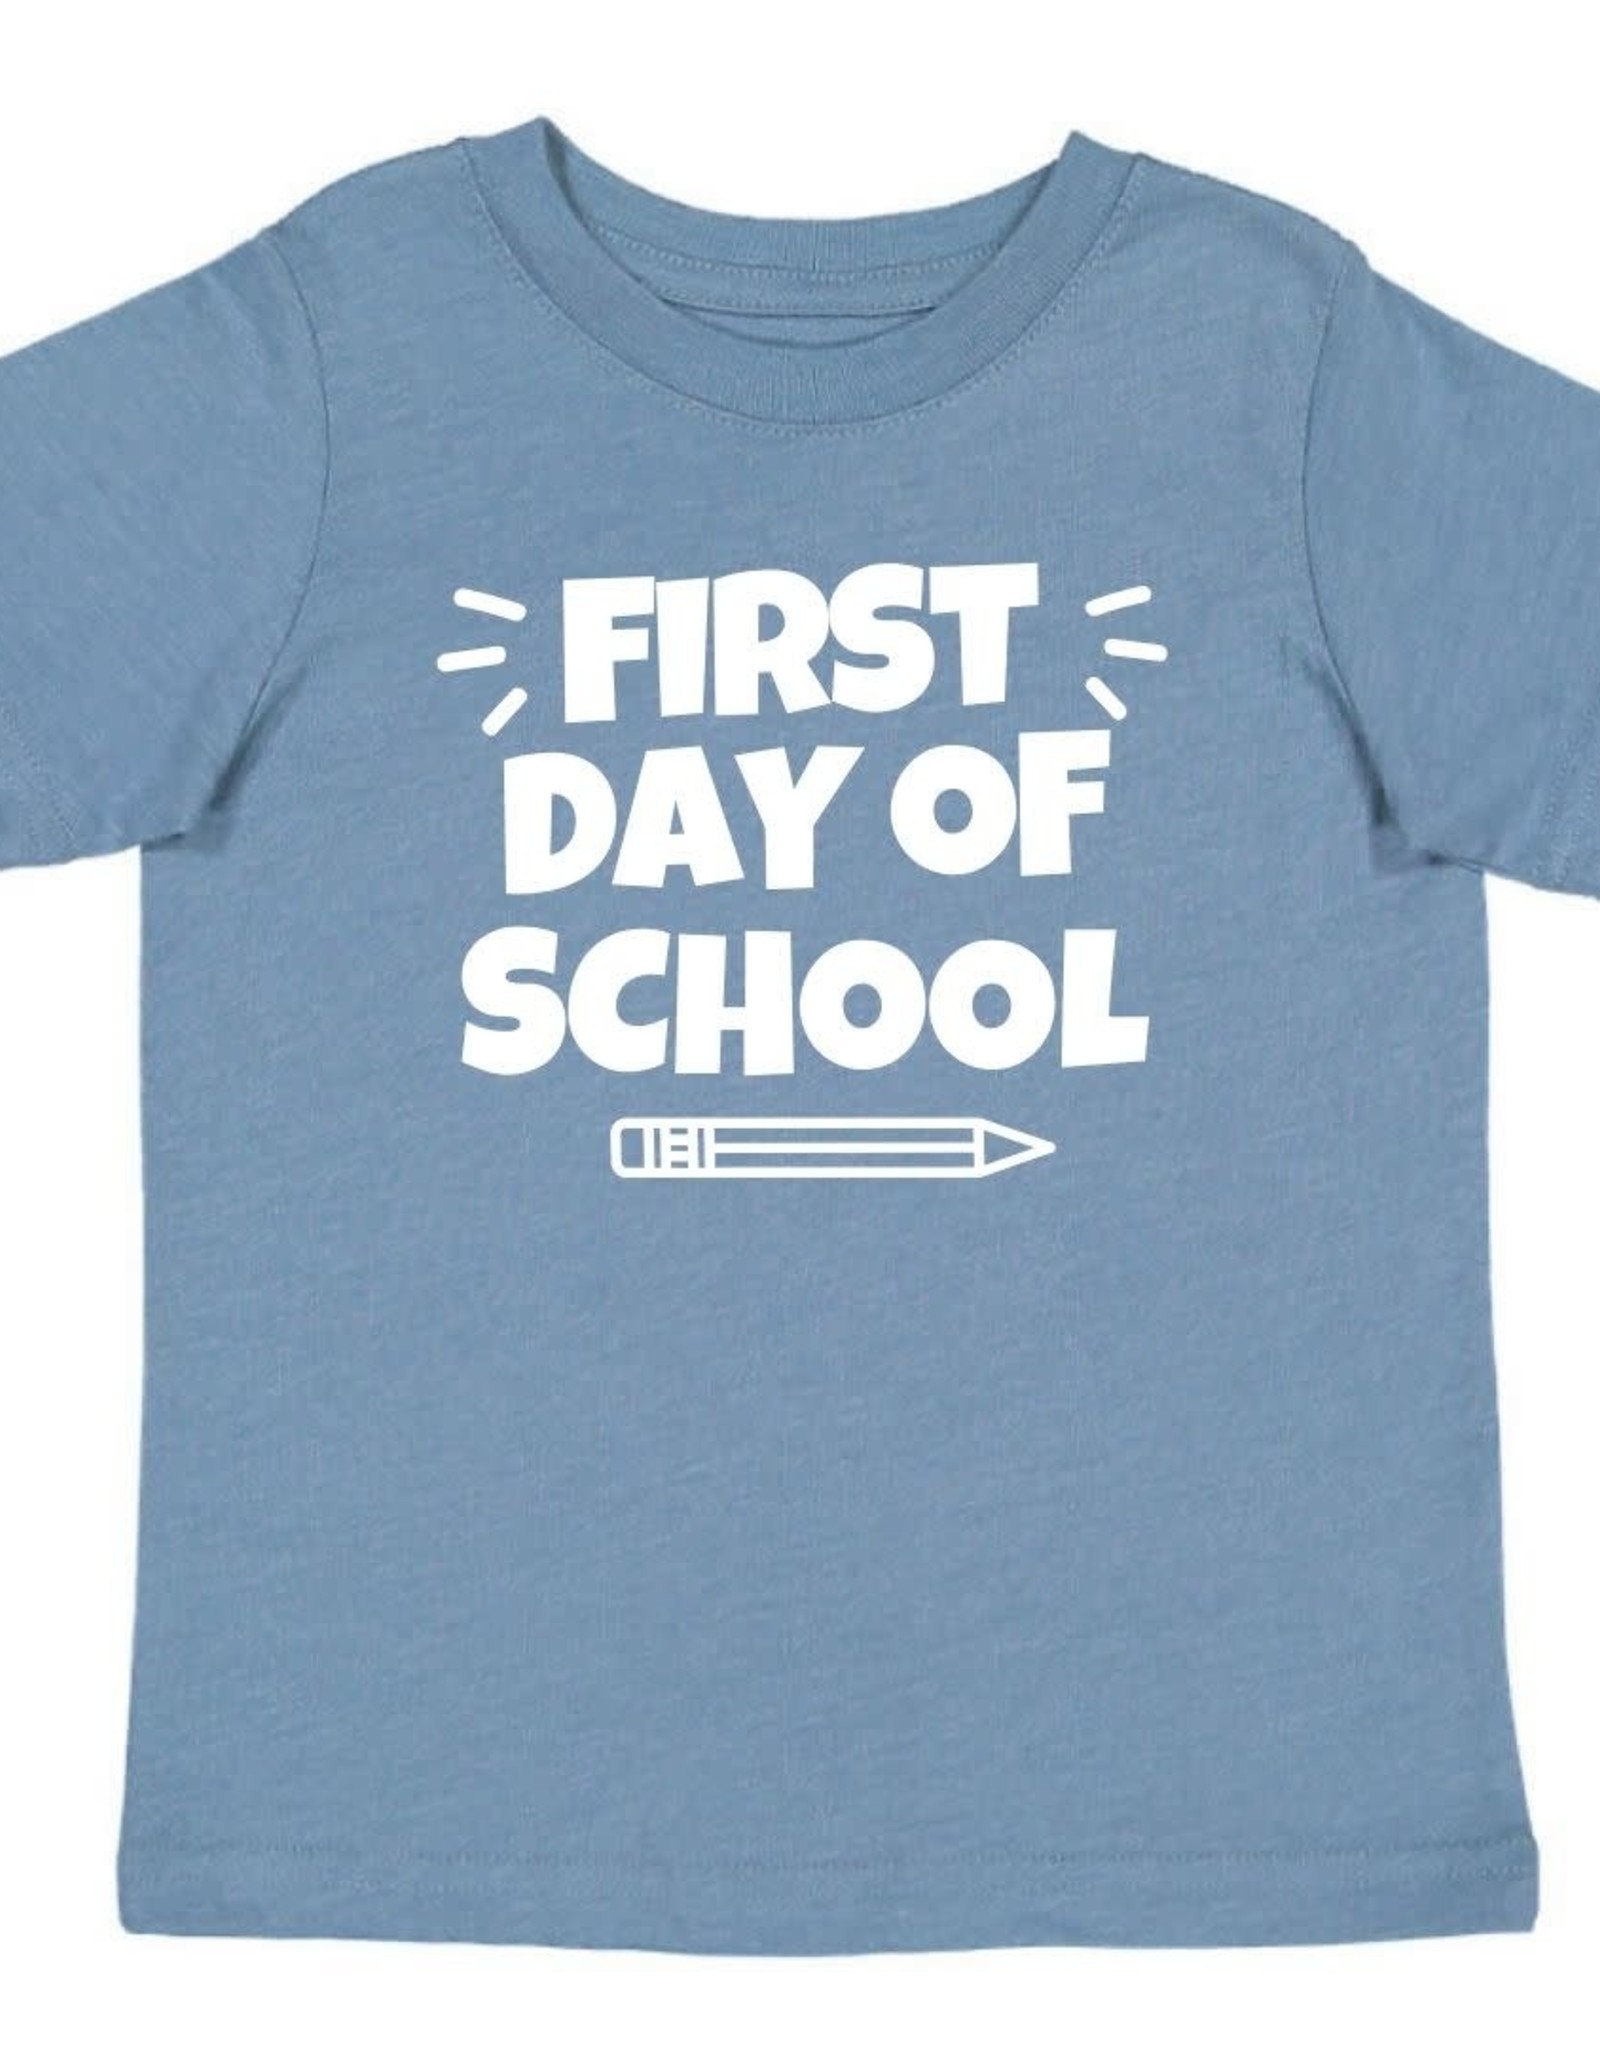 First Day of School Tee